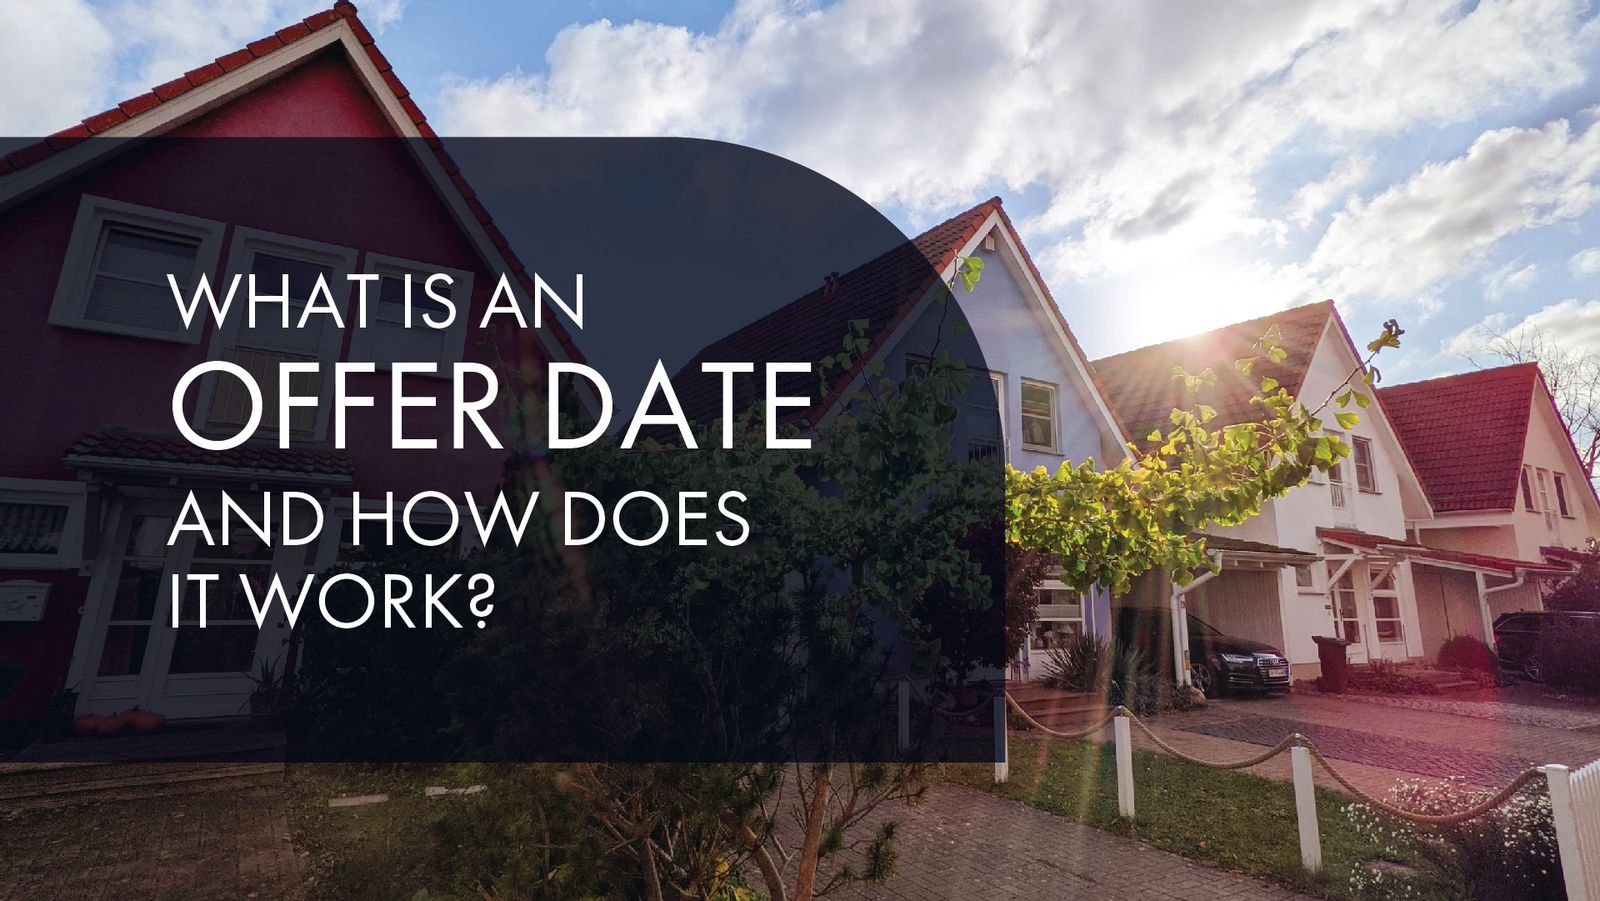 What is an Offer Date and how does it work?